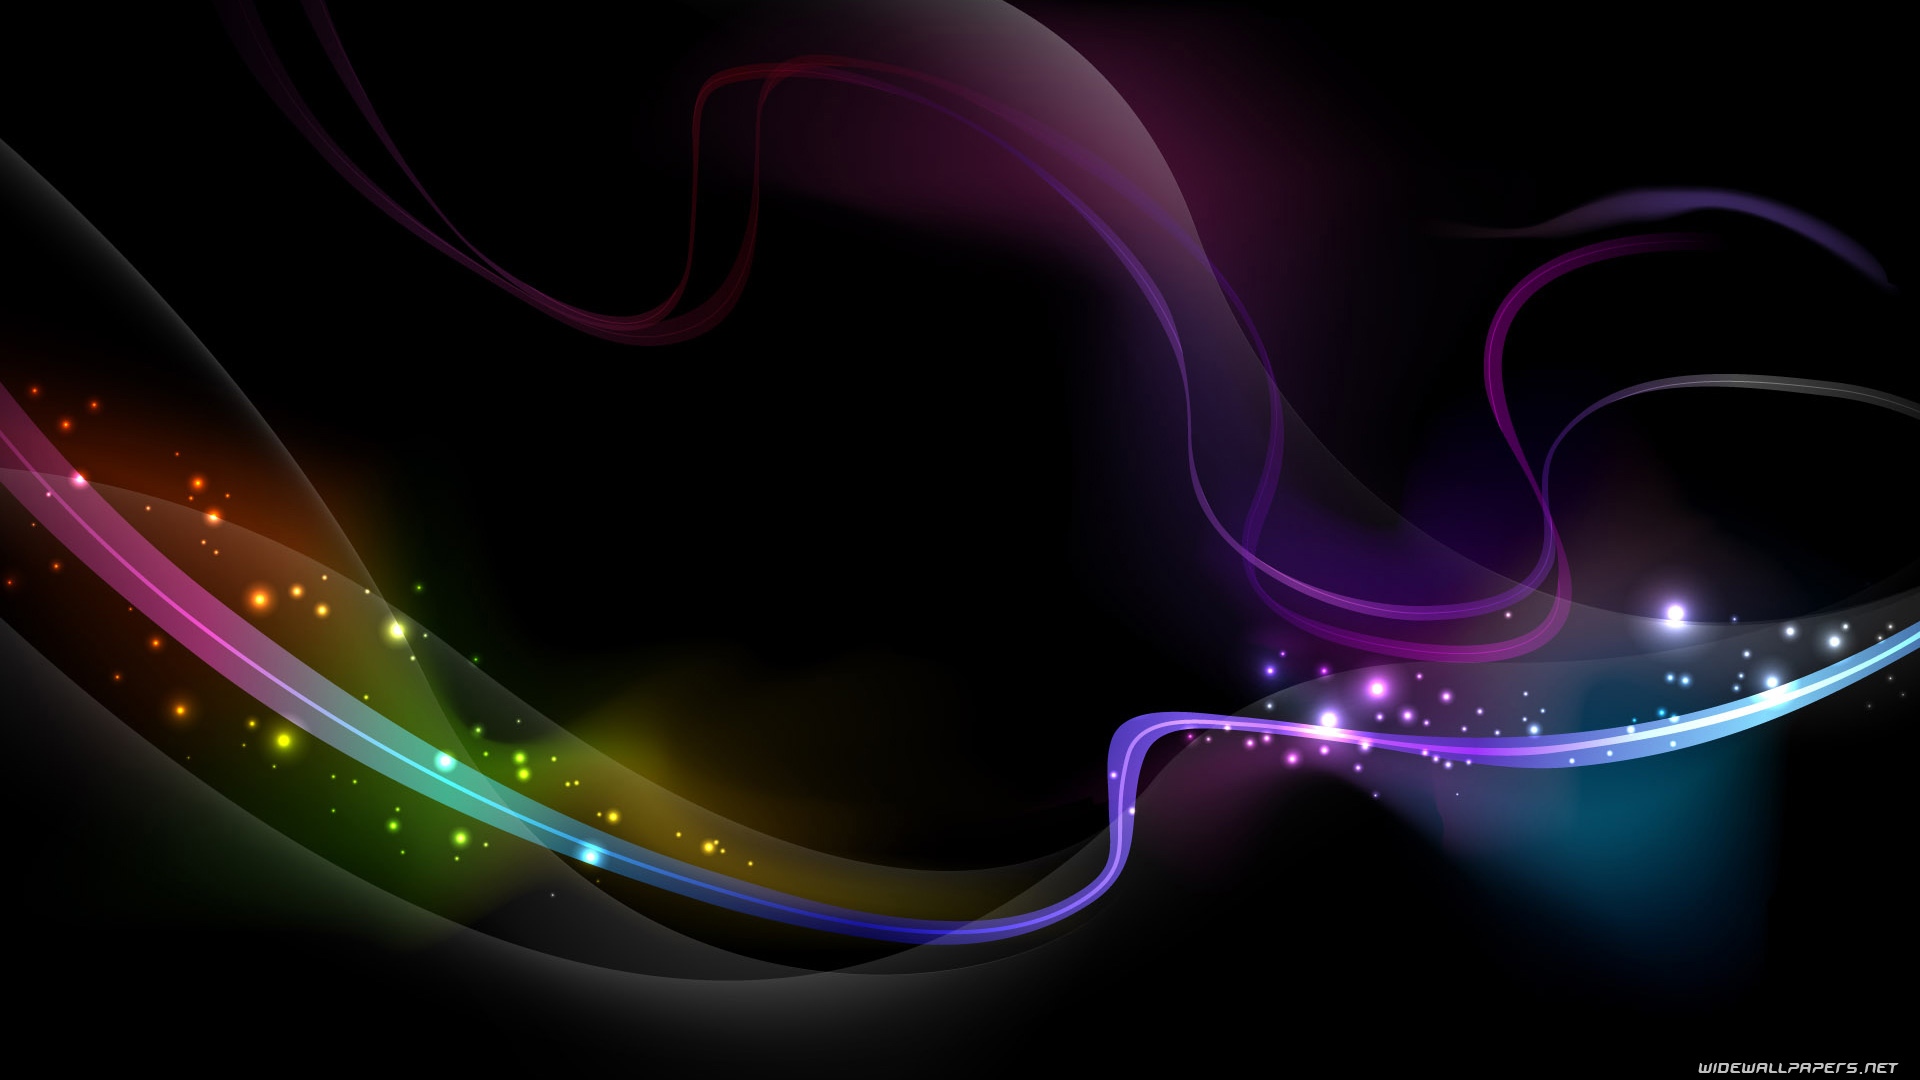 Dark Abstract Backgrounds Download HD Wallpapers 1920x1080